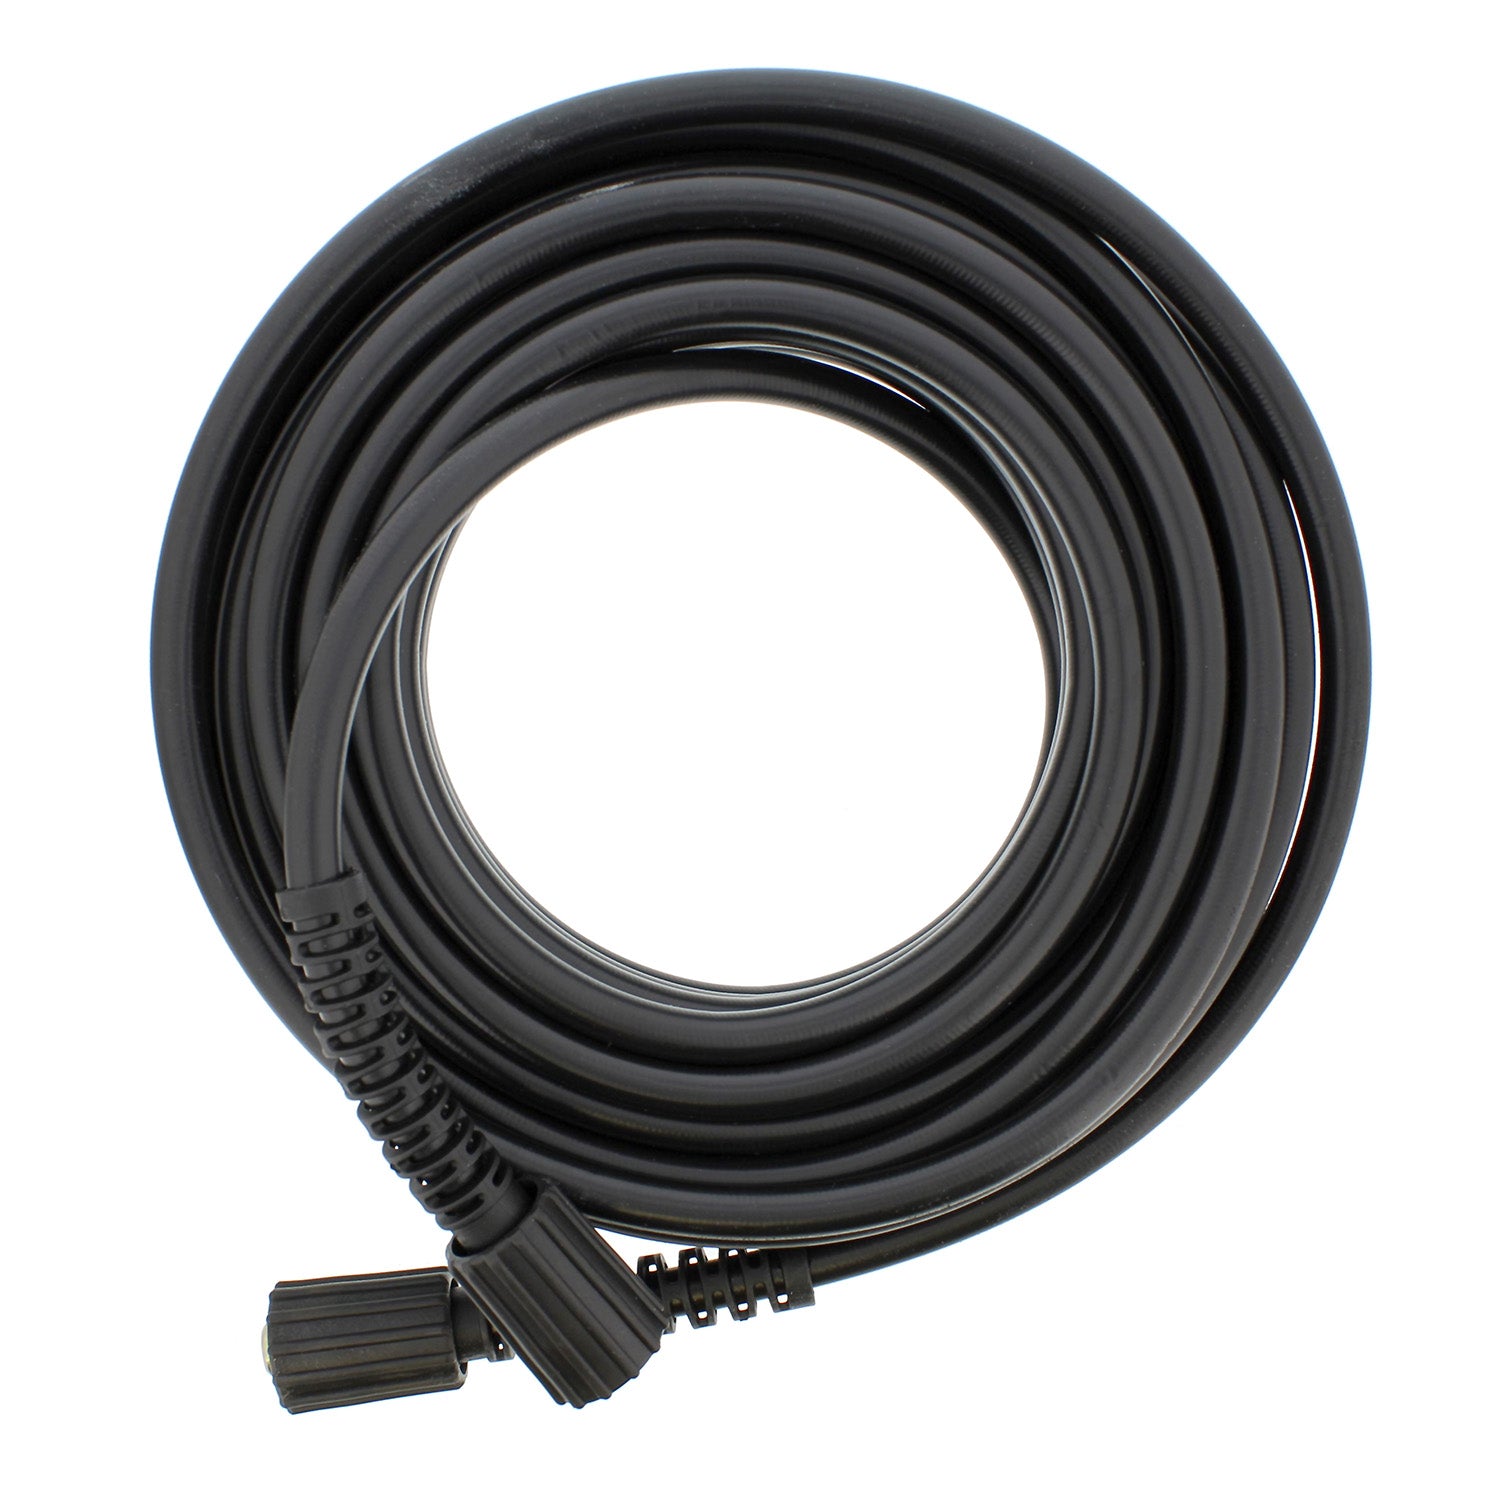 Pressure Washer Hose - 3000 PSI Power Washer Hose, M22 Fittings